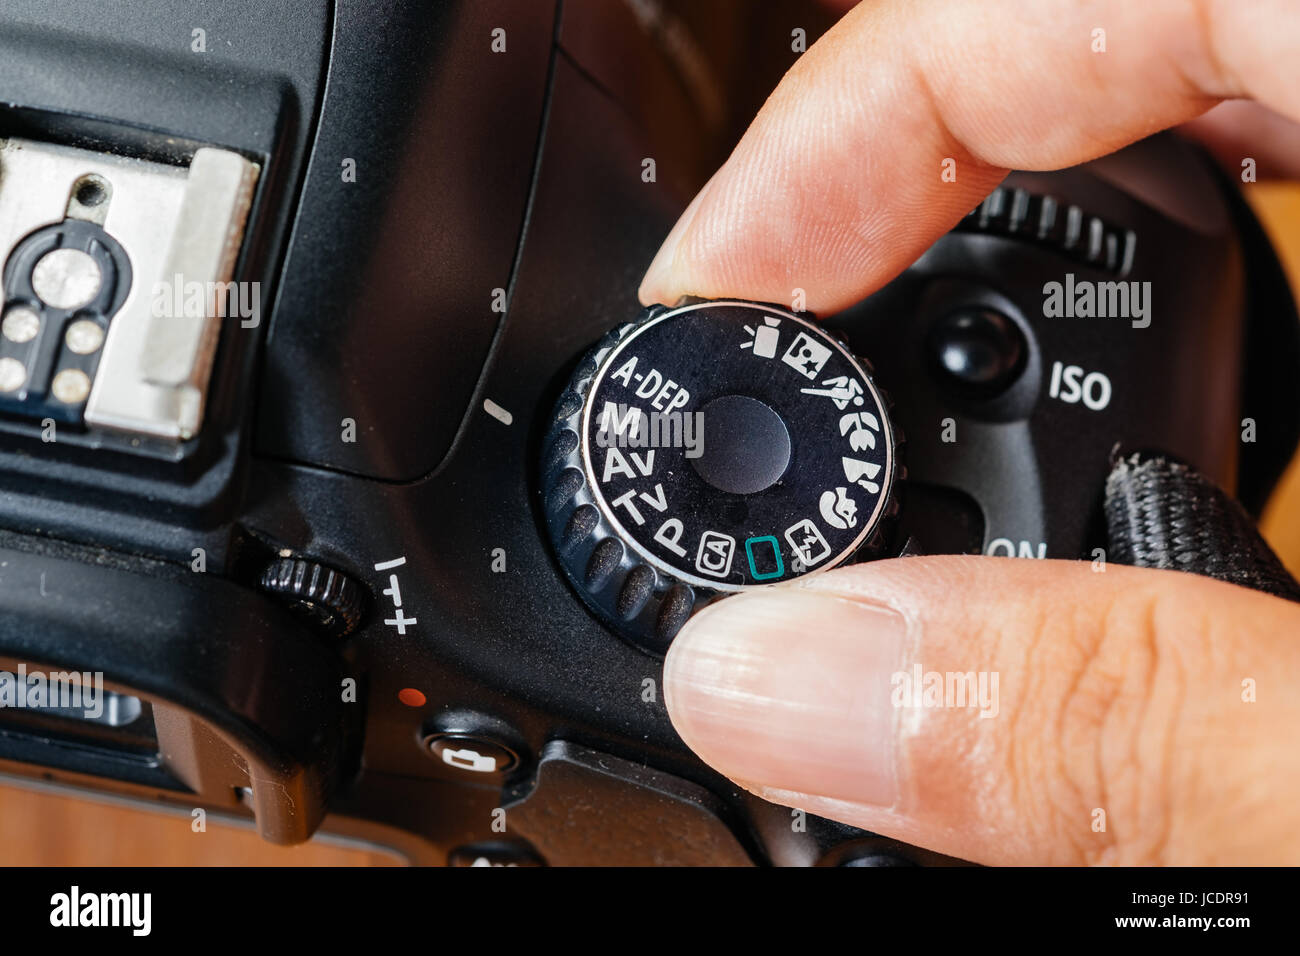 Manual dial mode on dslr camera with fingers on the dial Stock Photo - Alamy